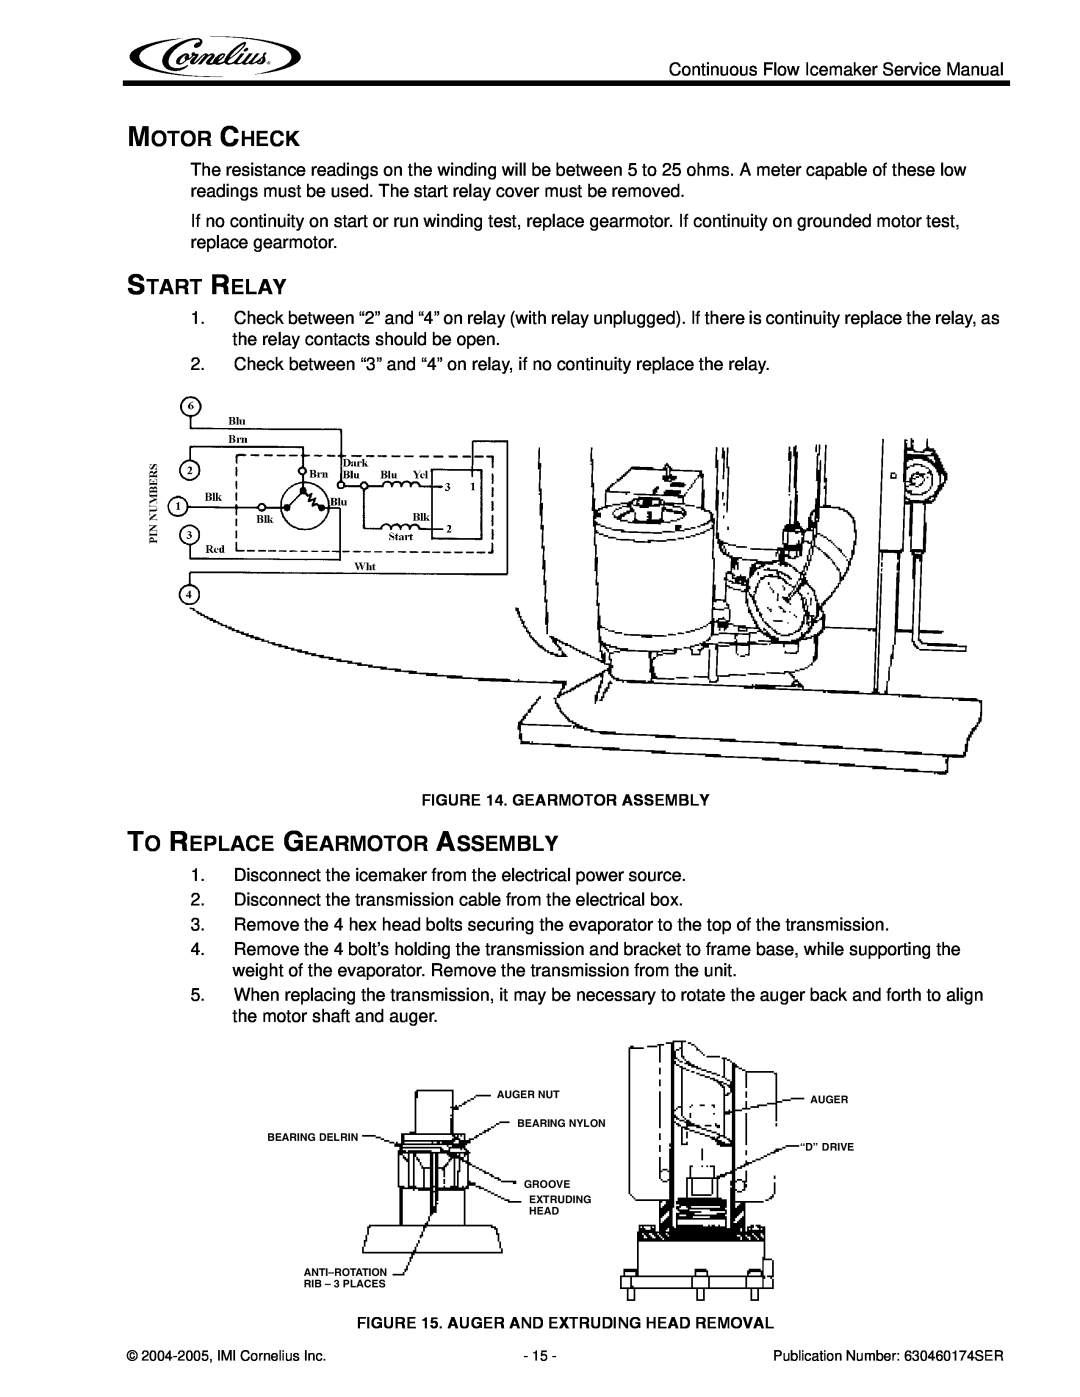 Cornelius 1000 service manual Motor Check, Start Relay, To Replace Gearmotor Assembly 